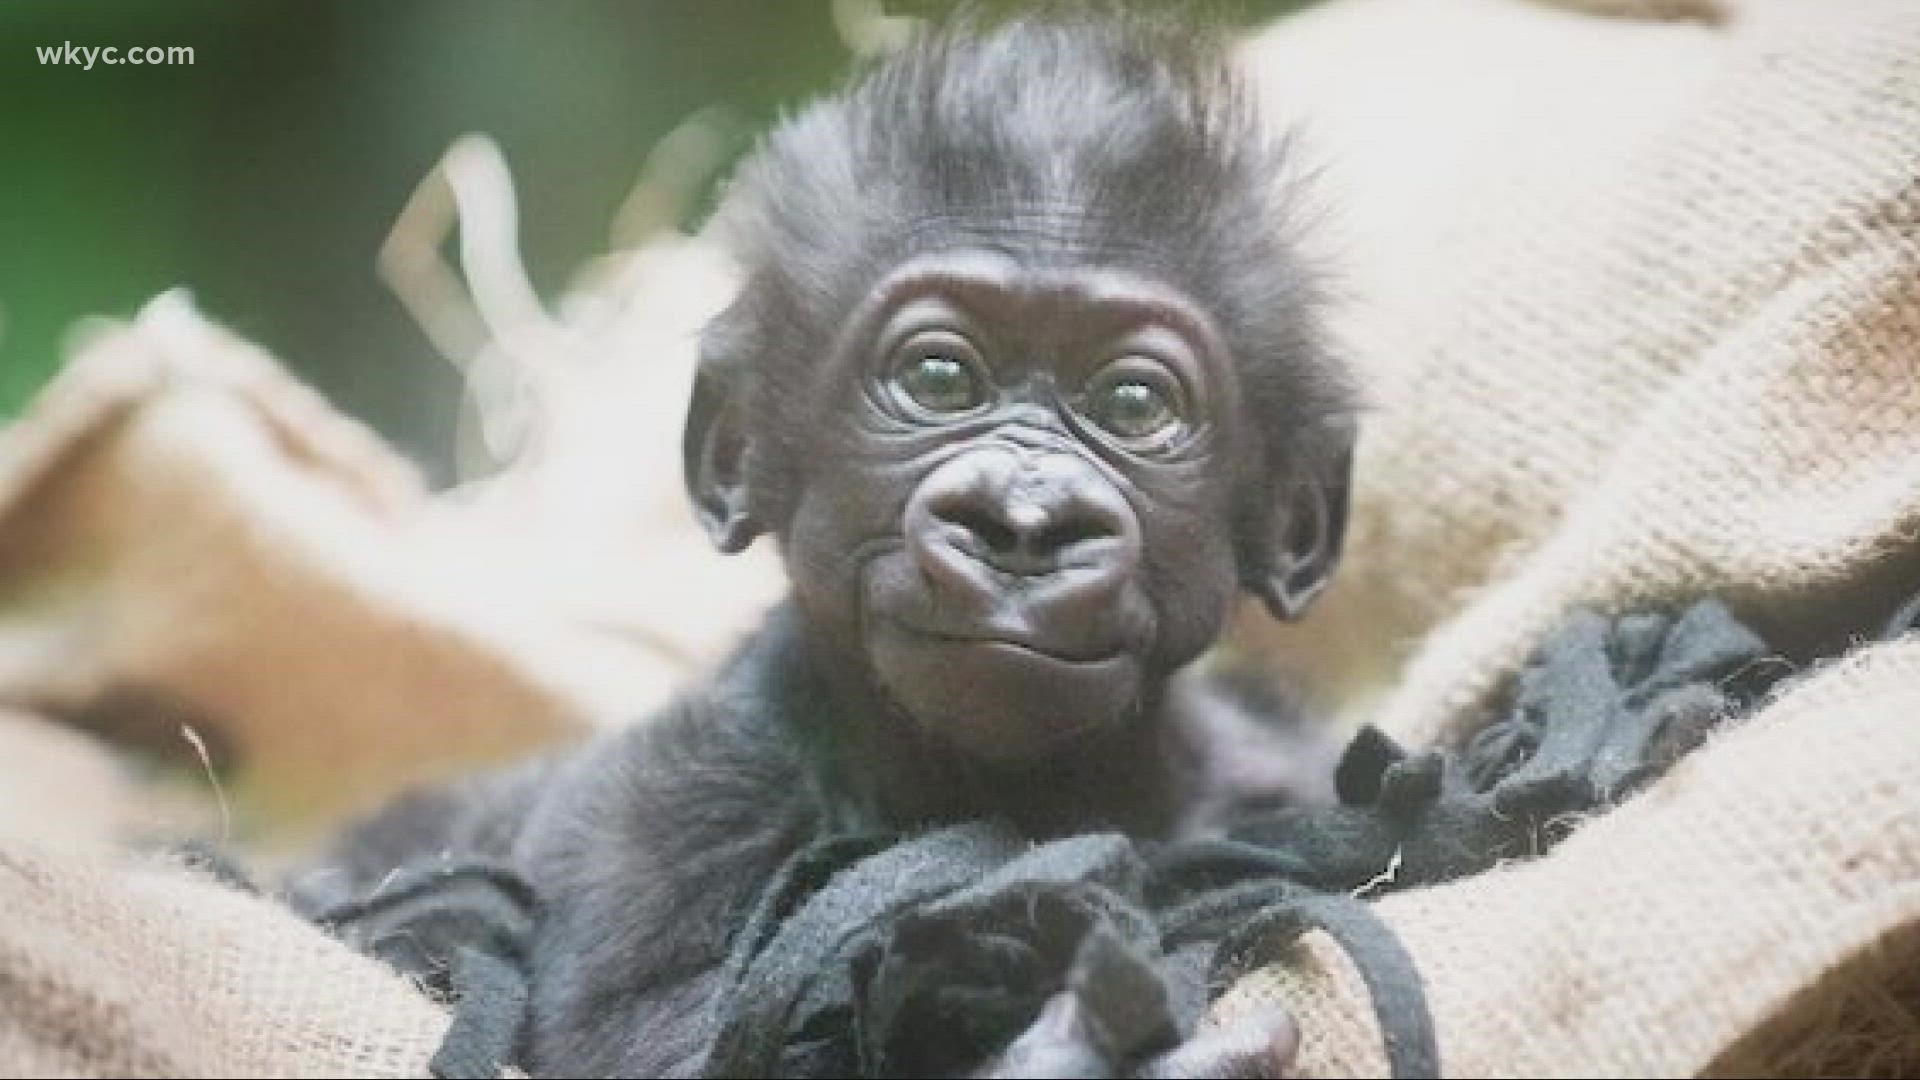 The Cleveland Metroparks Zoo needs your help in picking the name for their baby gorilla.